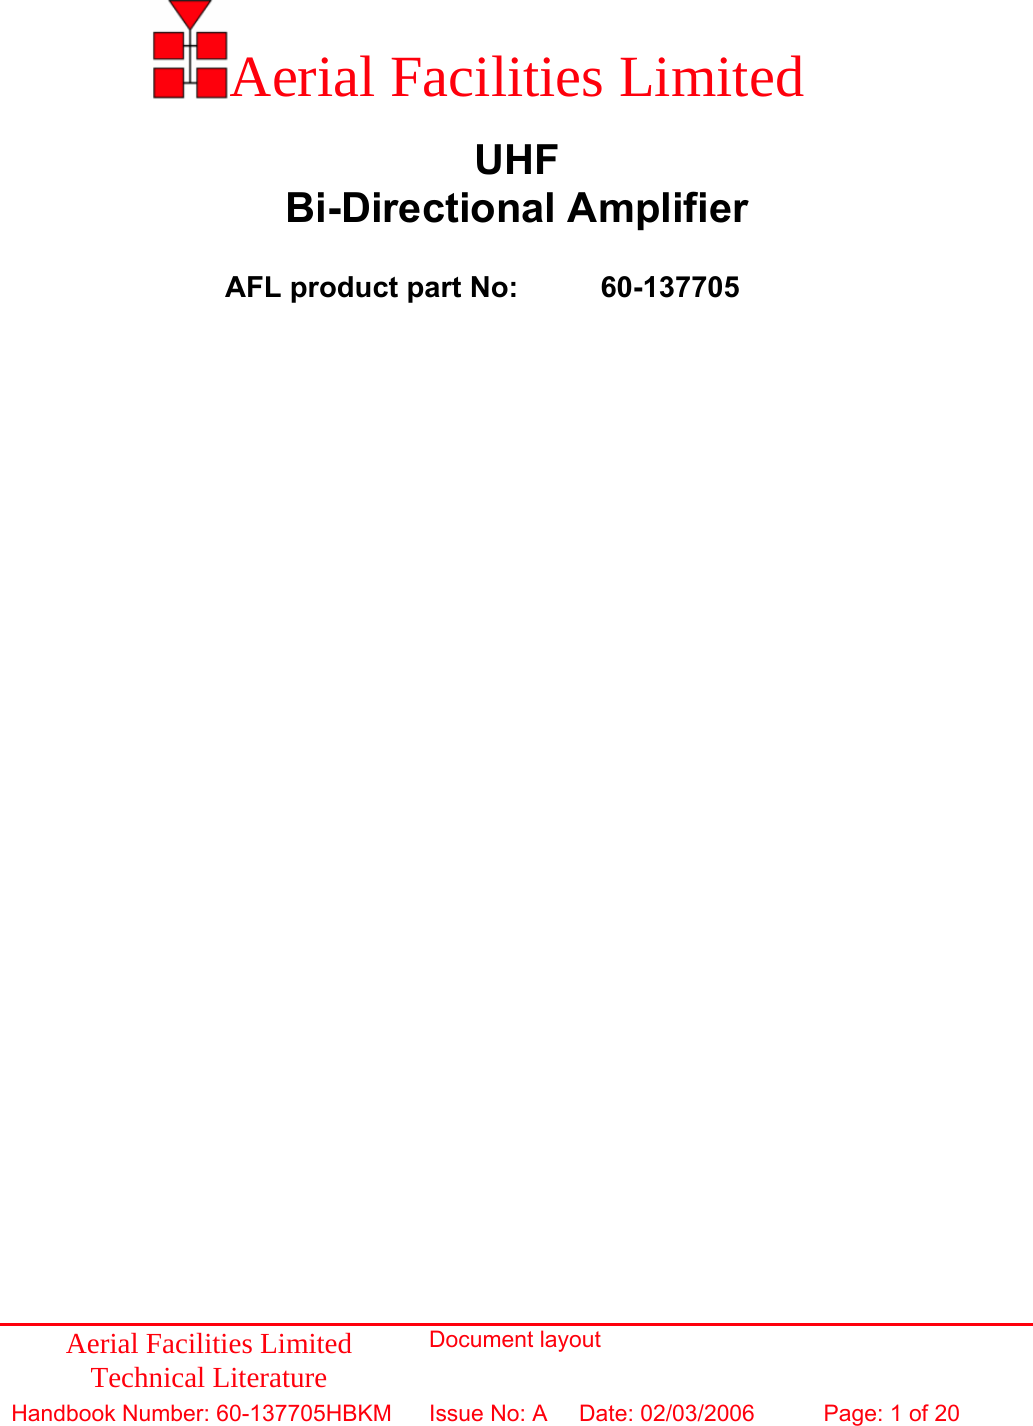 Aerial Facilities Limited Technical Literature Document layout Handbook Number: 60-137705HBKM Issue No: A  Date: 02/03/2006 Page: 1 of 20           Aerial Facilities Limited  UHF Bi-Directional Amplifier  AFL product part No:   60-137705     